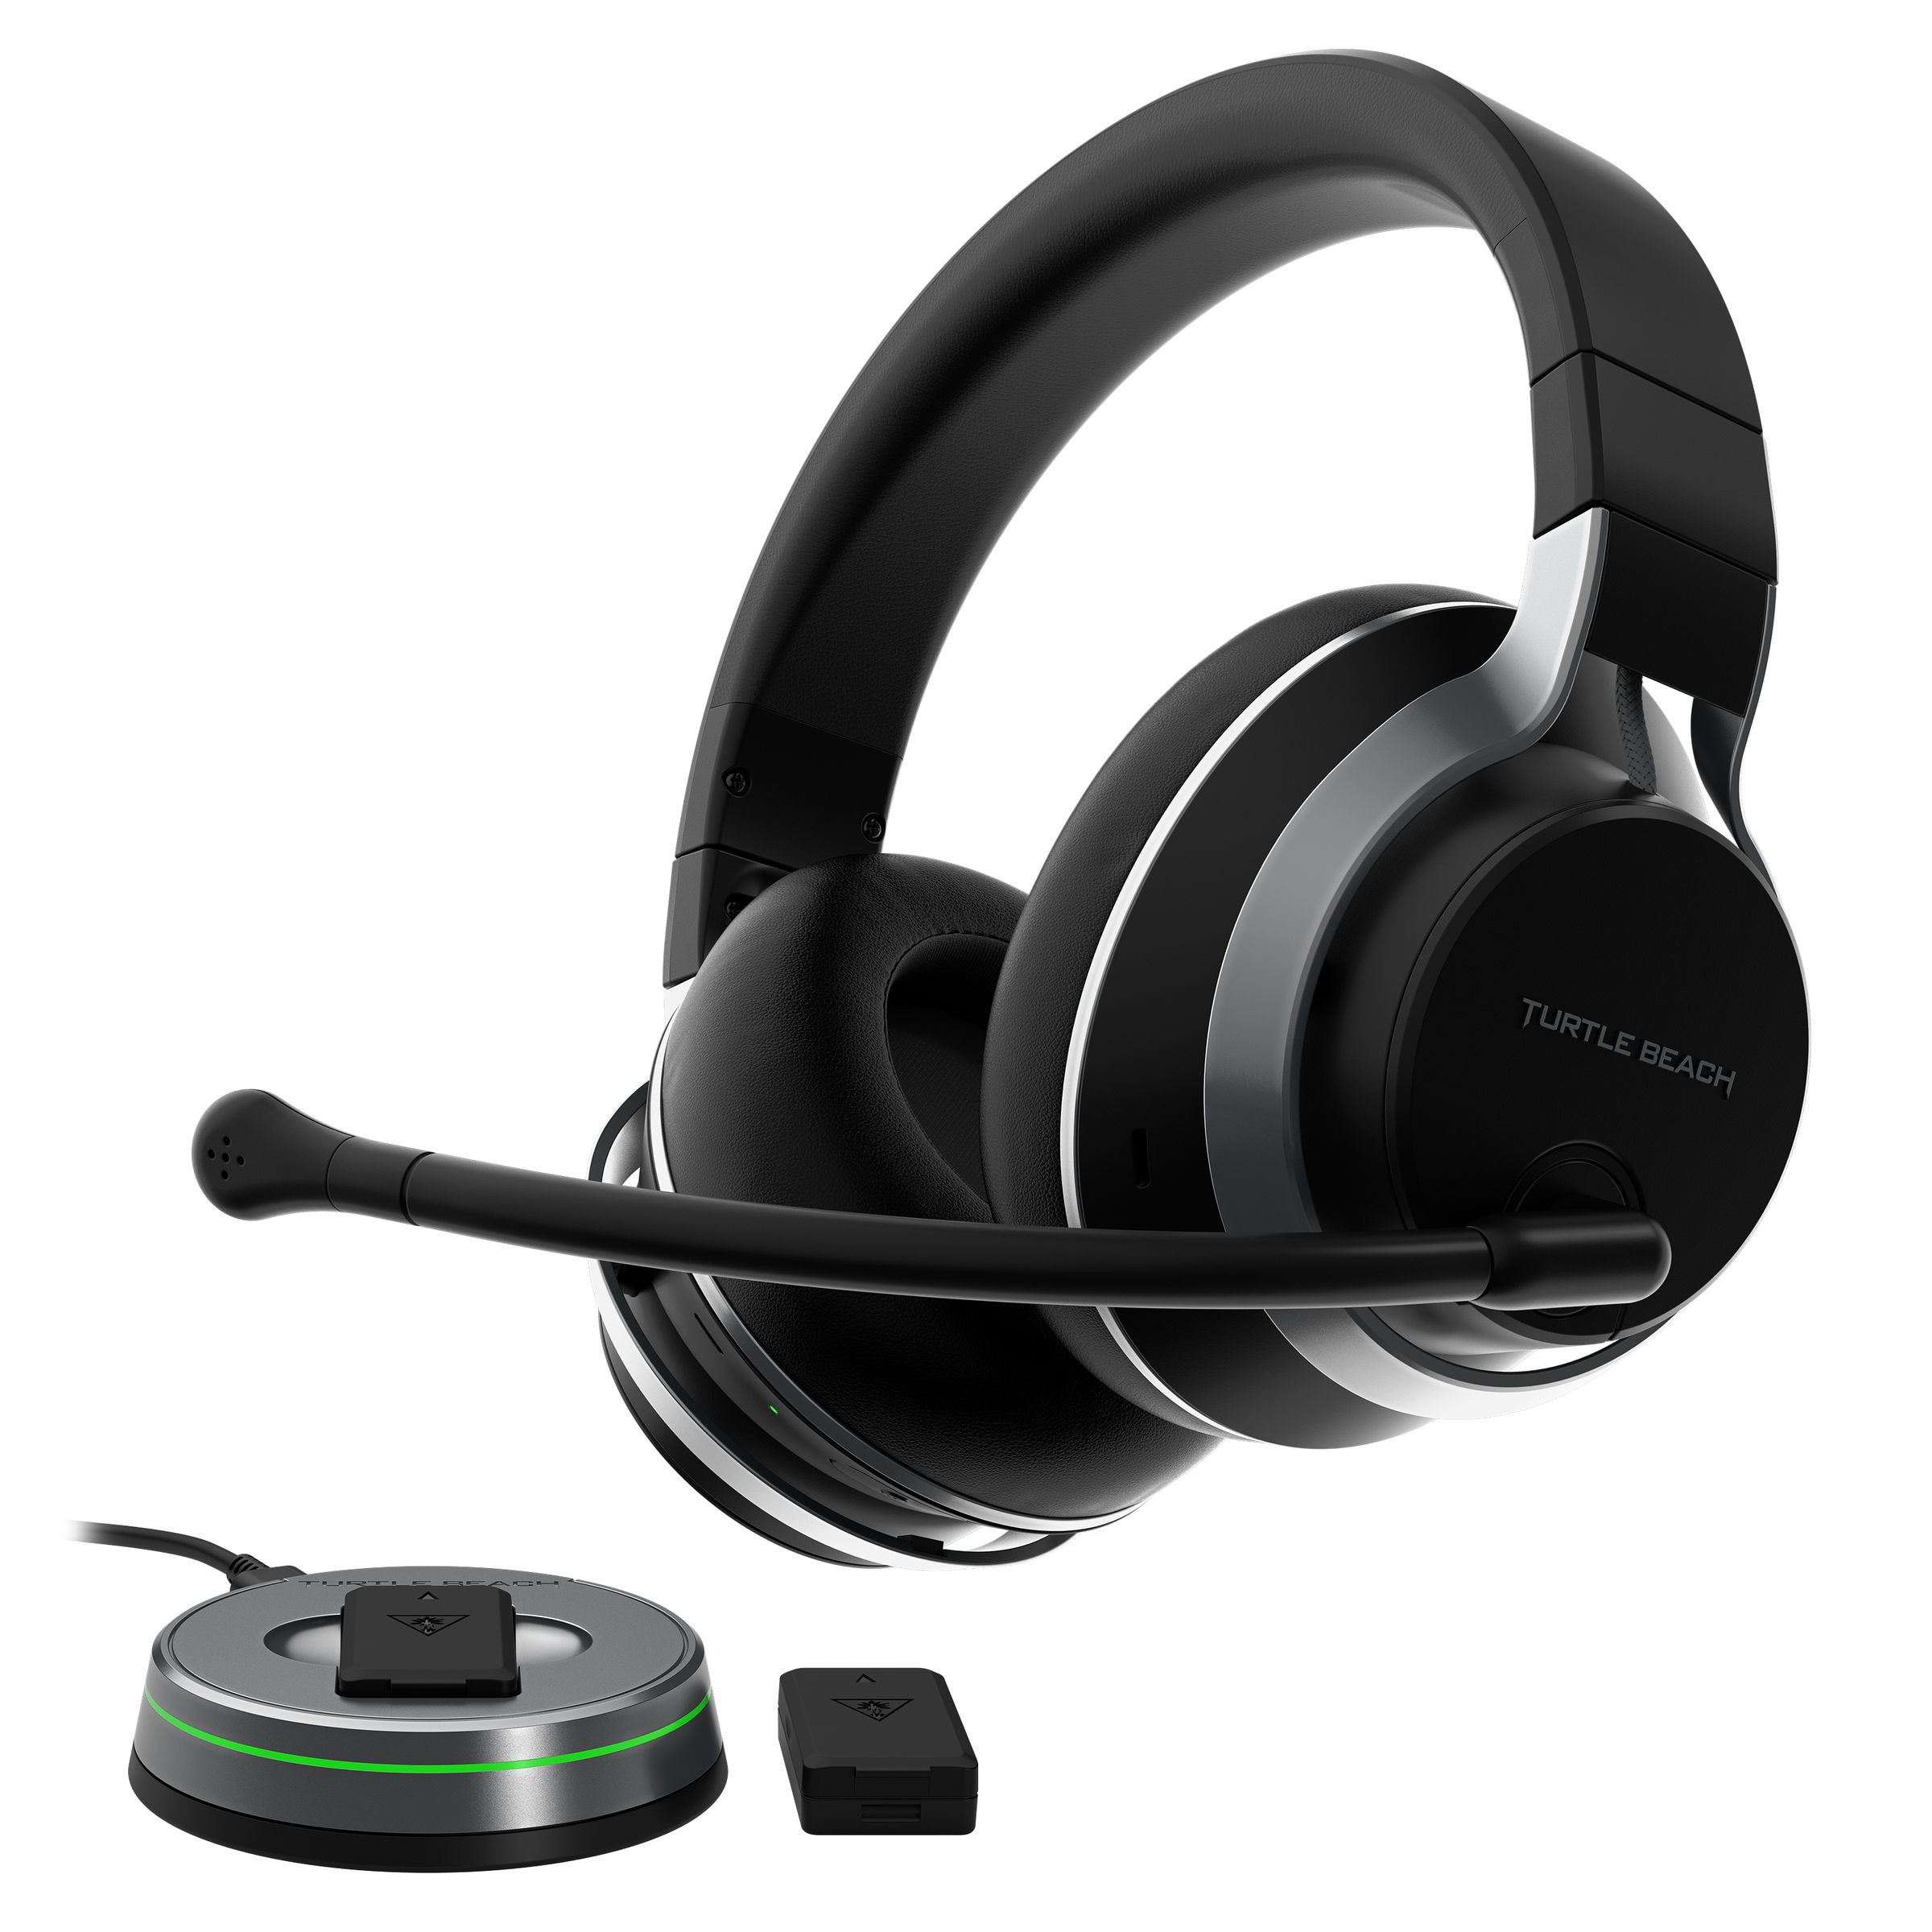 Turtle Beach’s flagship gaming headset offers ‘unrivaled’ noise cancellation — for a price